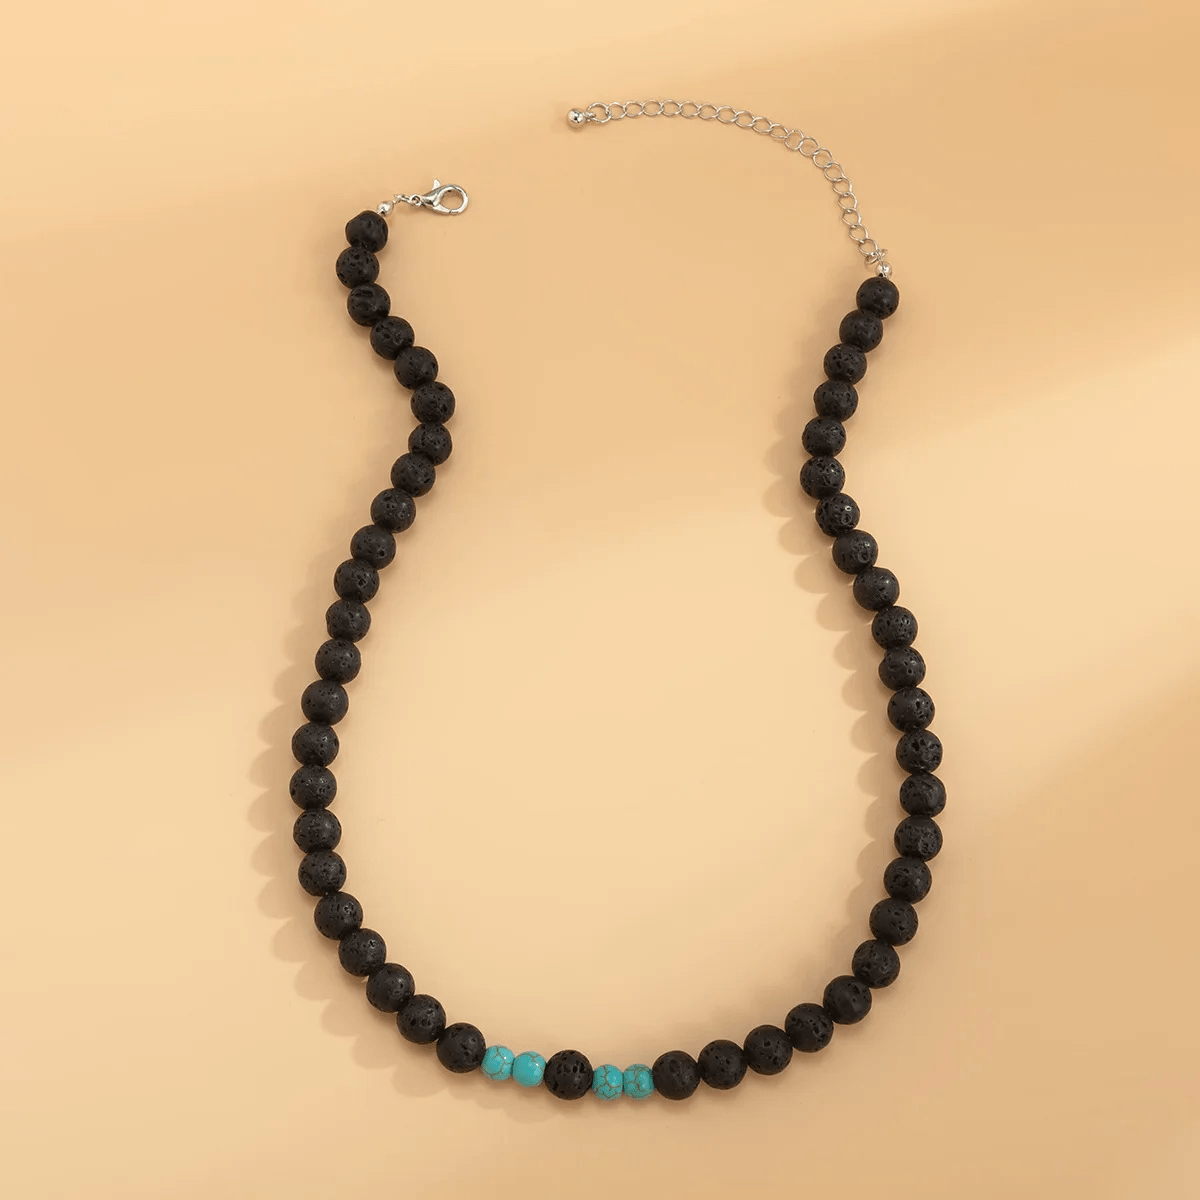 Cool Fab Lagoon - Natural Black Lava Stone With Blue Pearl Necklace Mens & Boys (21 Inch Adjustable